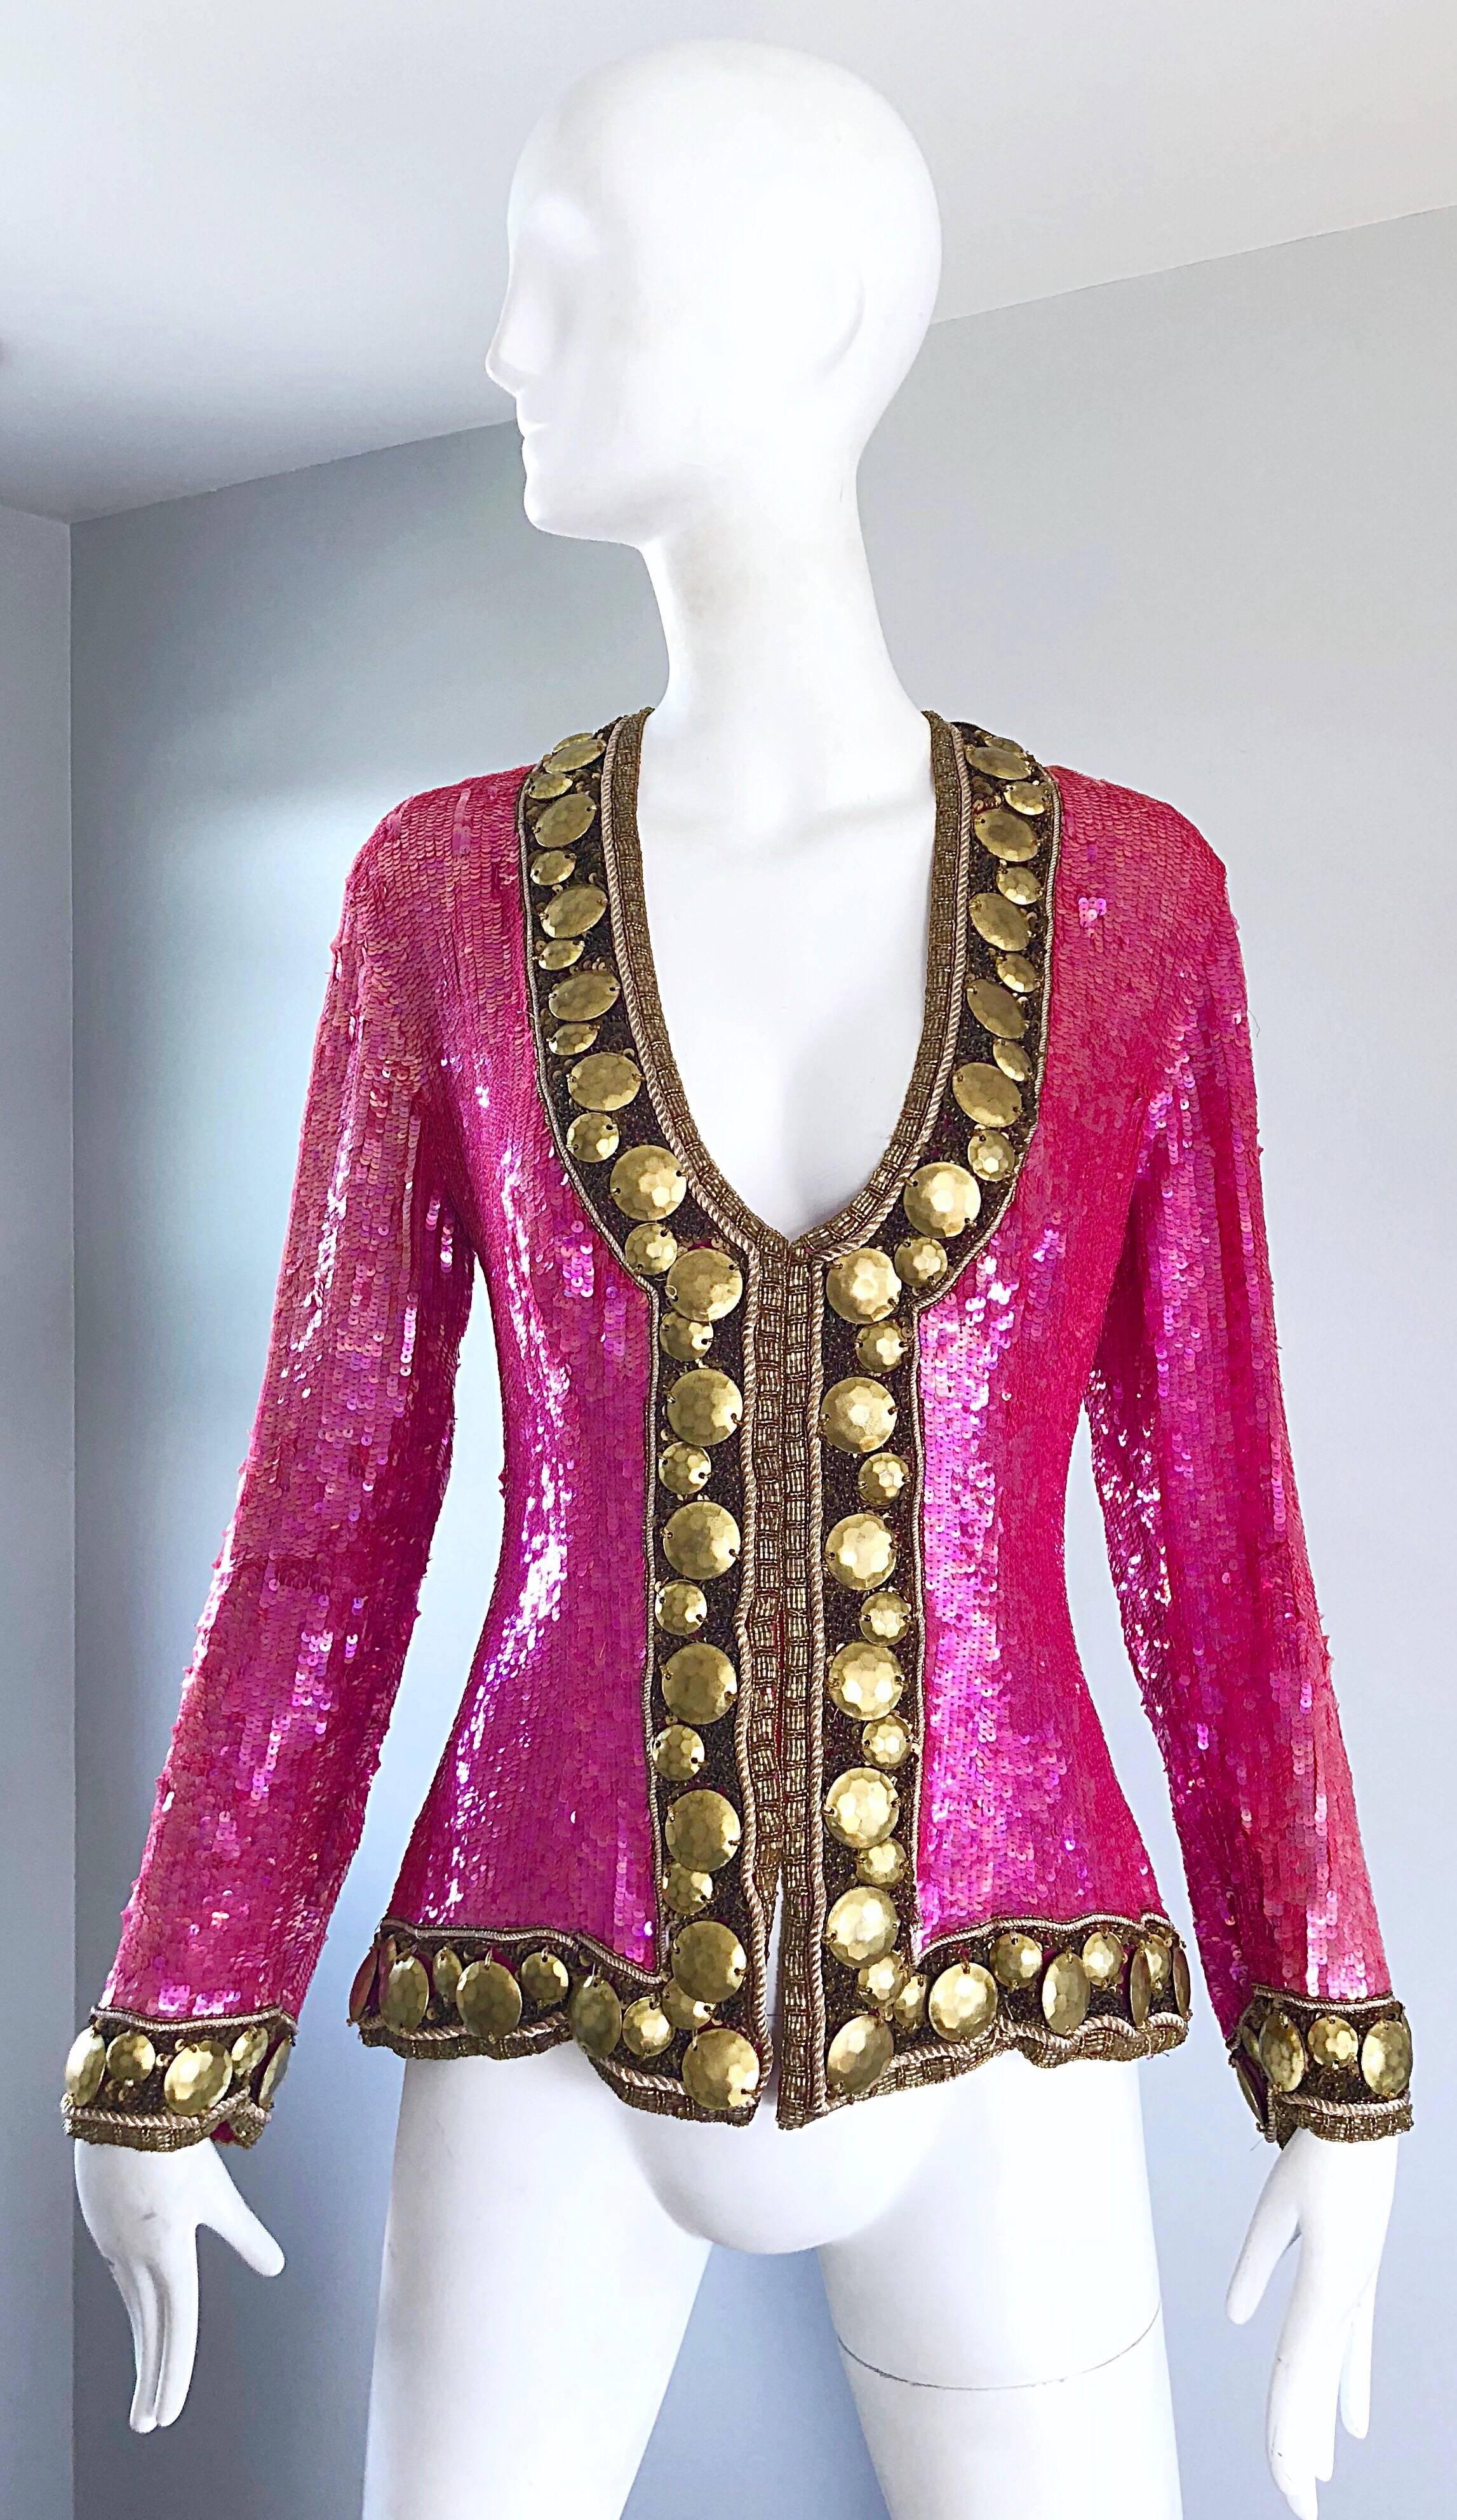 Incredible LIZA CARR for LILLIE RUBIN hot pink and gold silk beaded and sequined jacket! Features thousands of hand-sewn pink sequins throughout. Large gold hammered discs along the trim, with hand-sewn bronze seed beads. Hidden snaps up the front